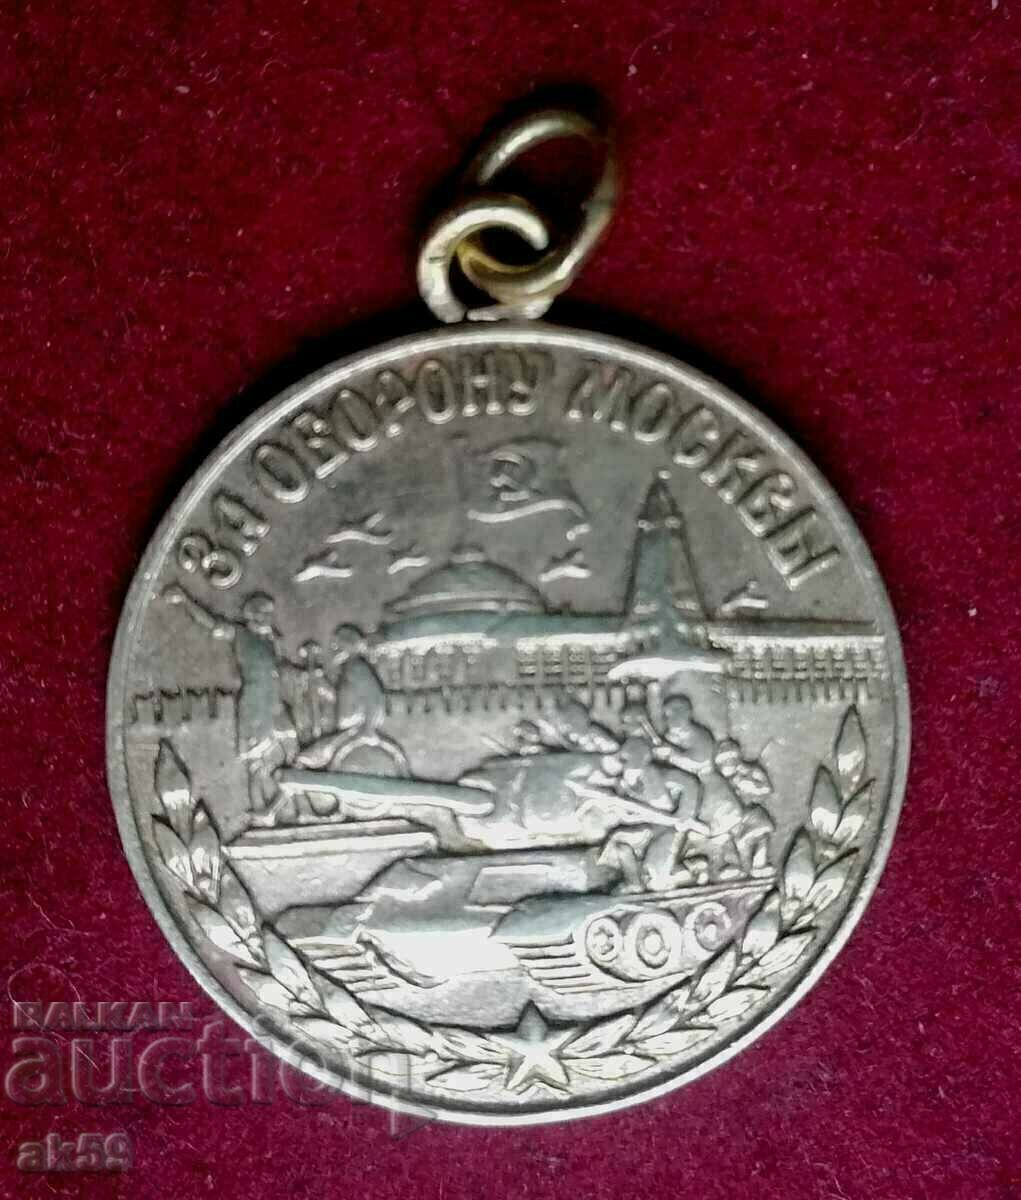 Medal "For the Defense of Moscow - 1944" USSR